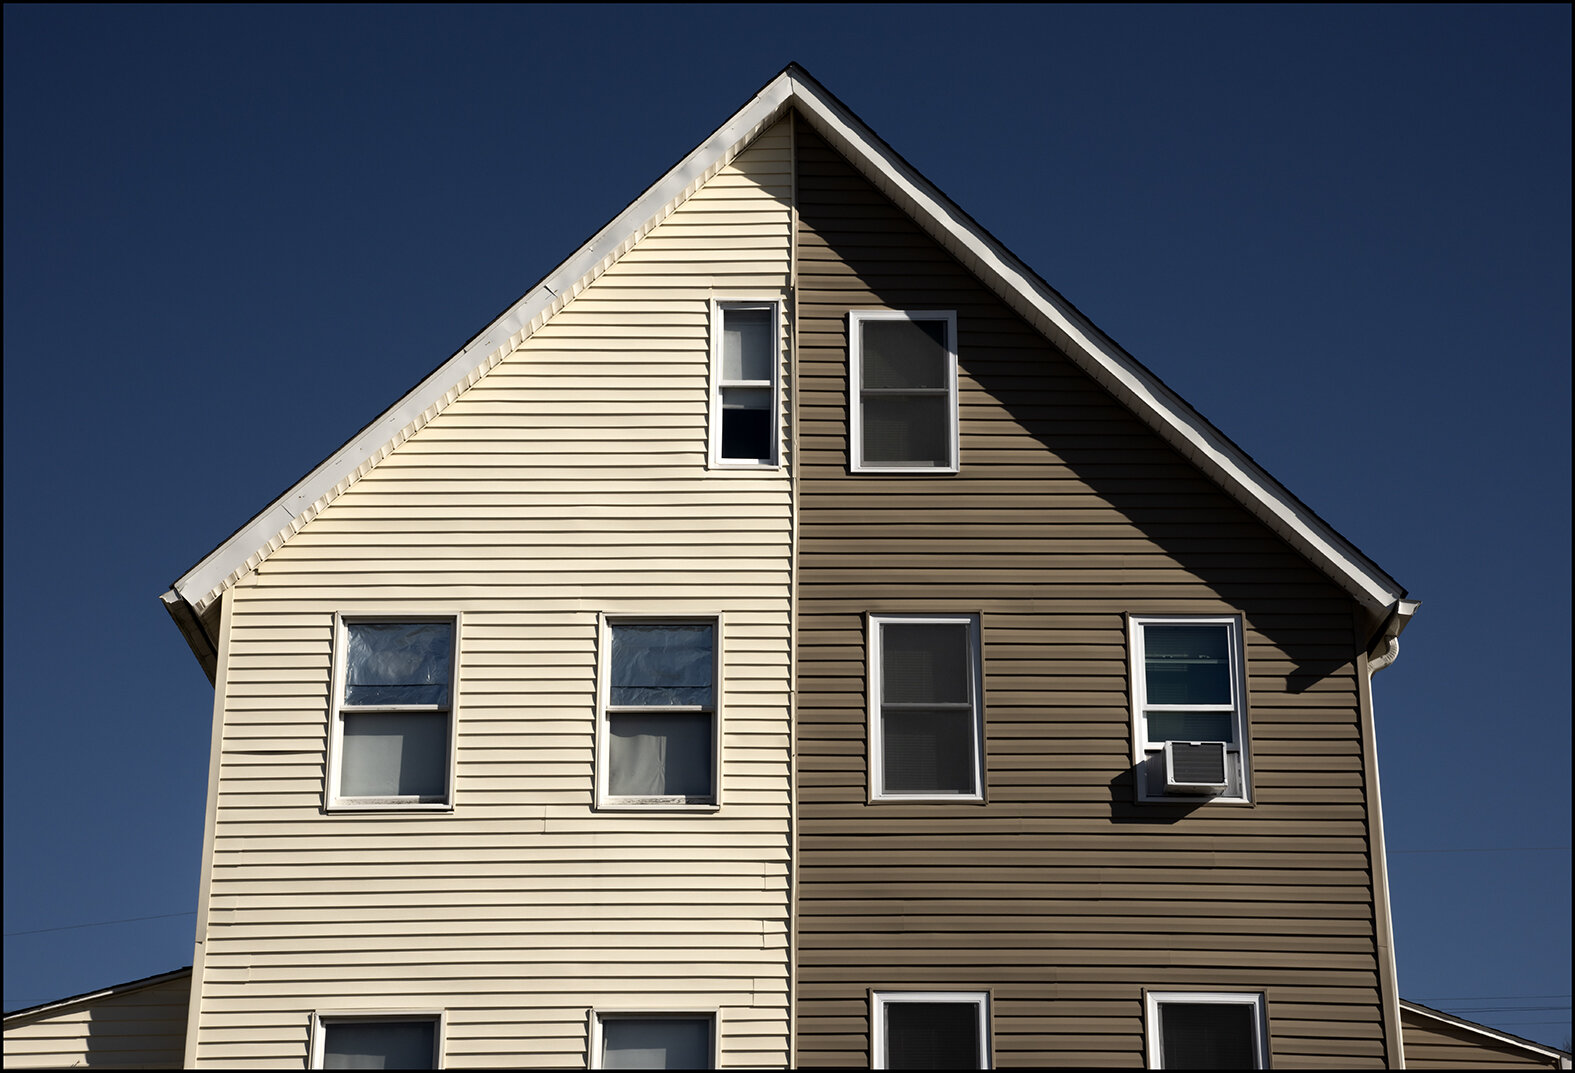 %22Two Shades Of A House%22-Lines House Architecture_Photo by Albert Ewing-3658.jpg